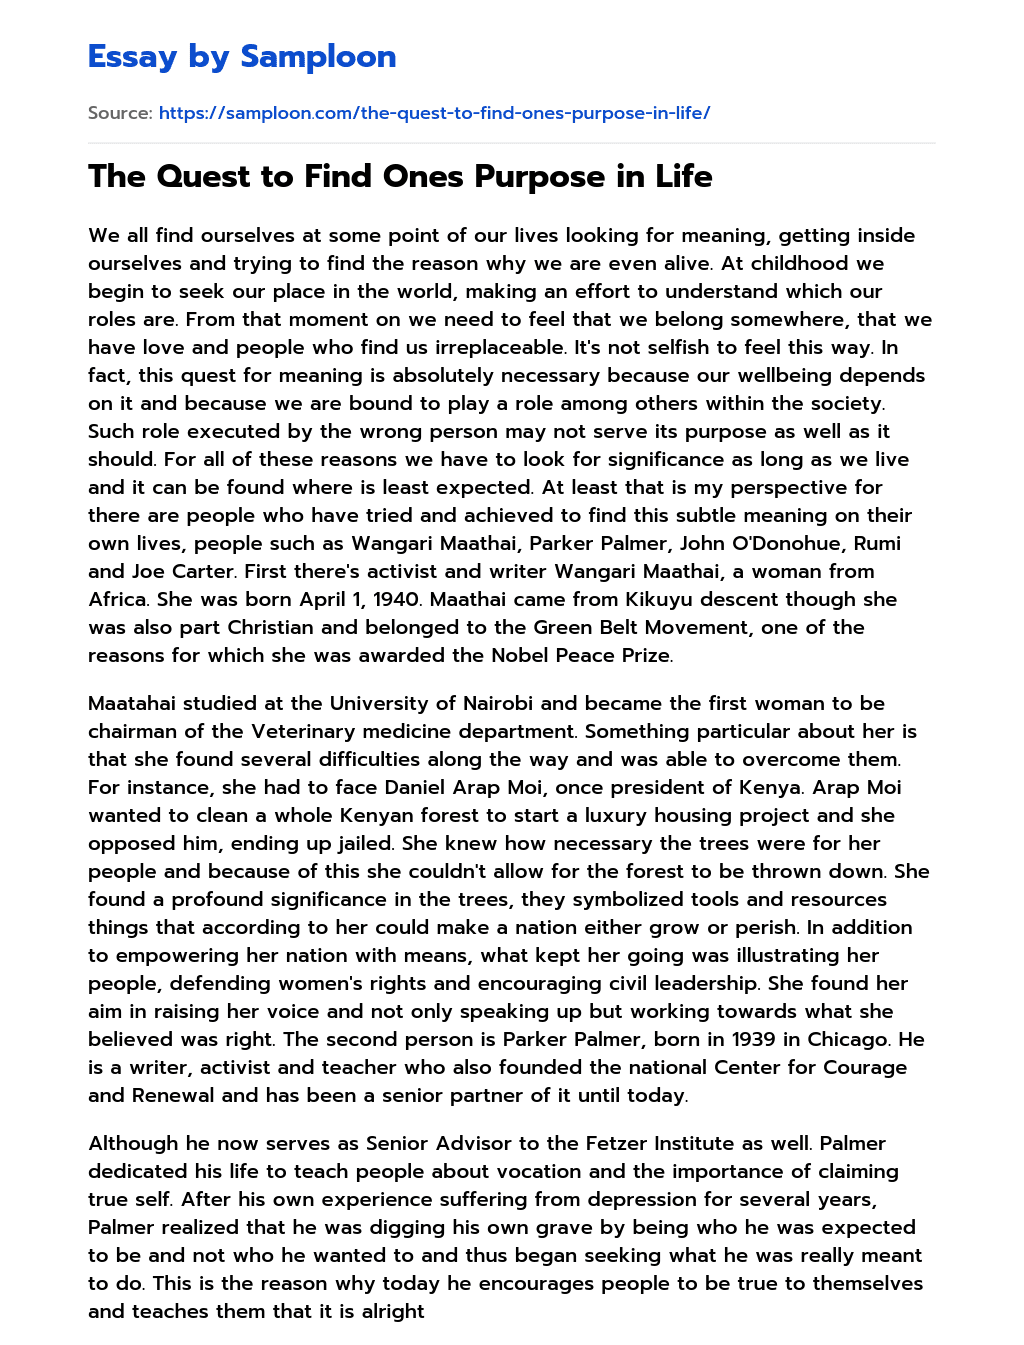 The Quest to Find Ones Purpose in Life essay